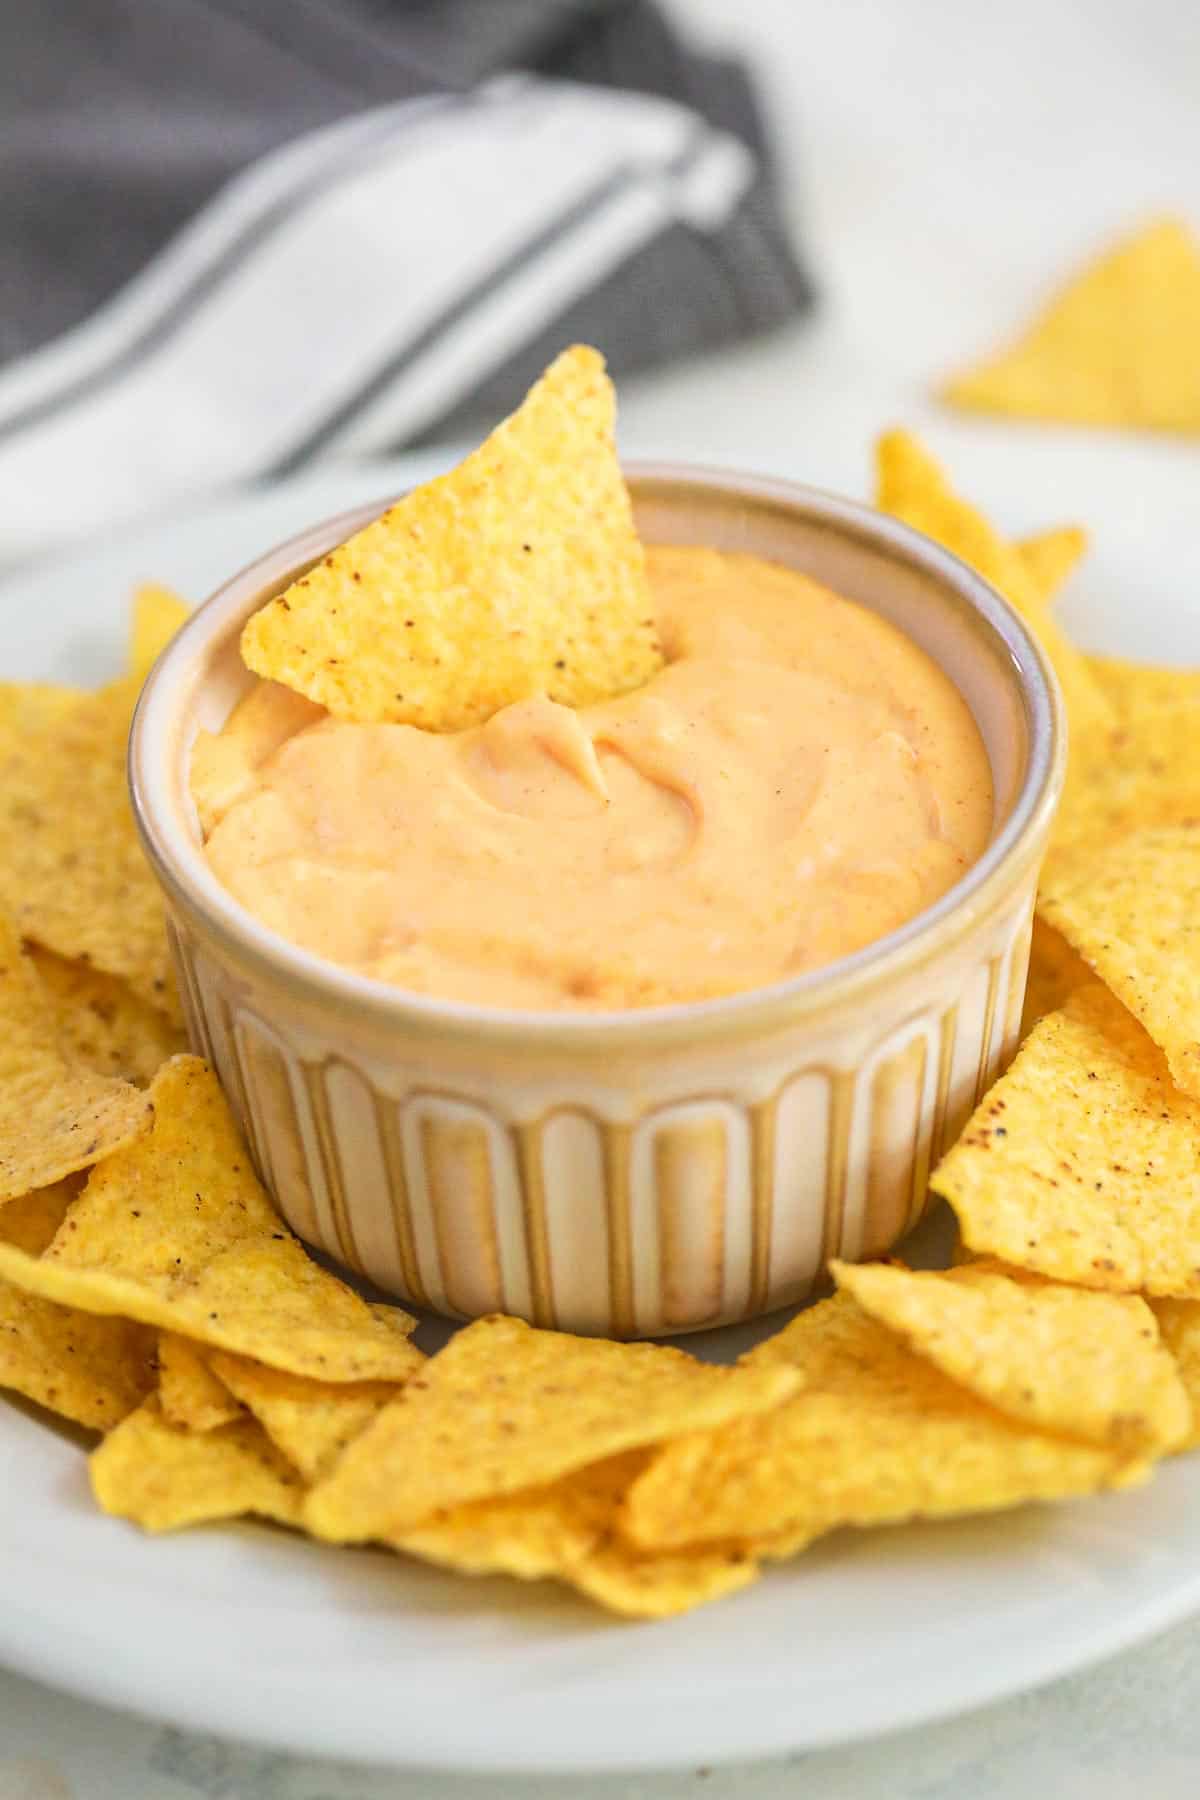 a chip placed in the nacho cheese